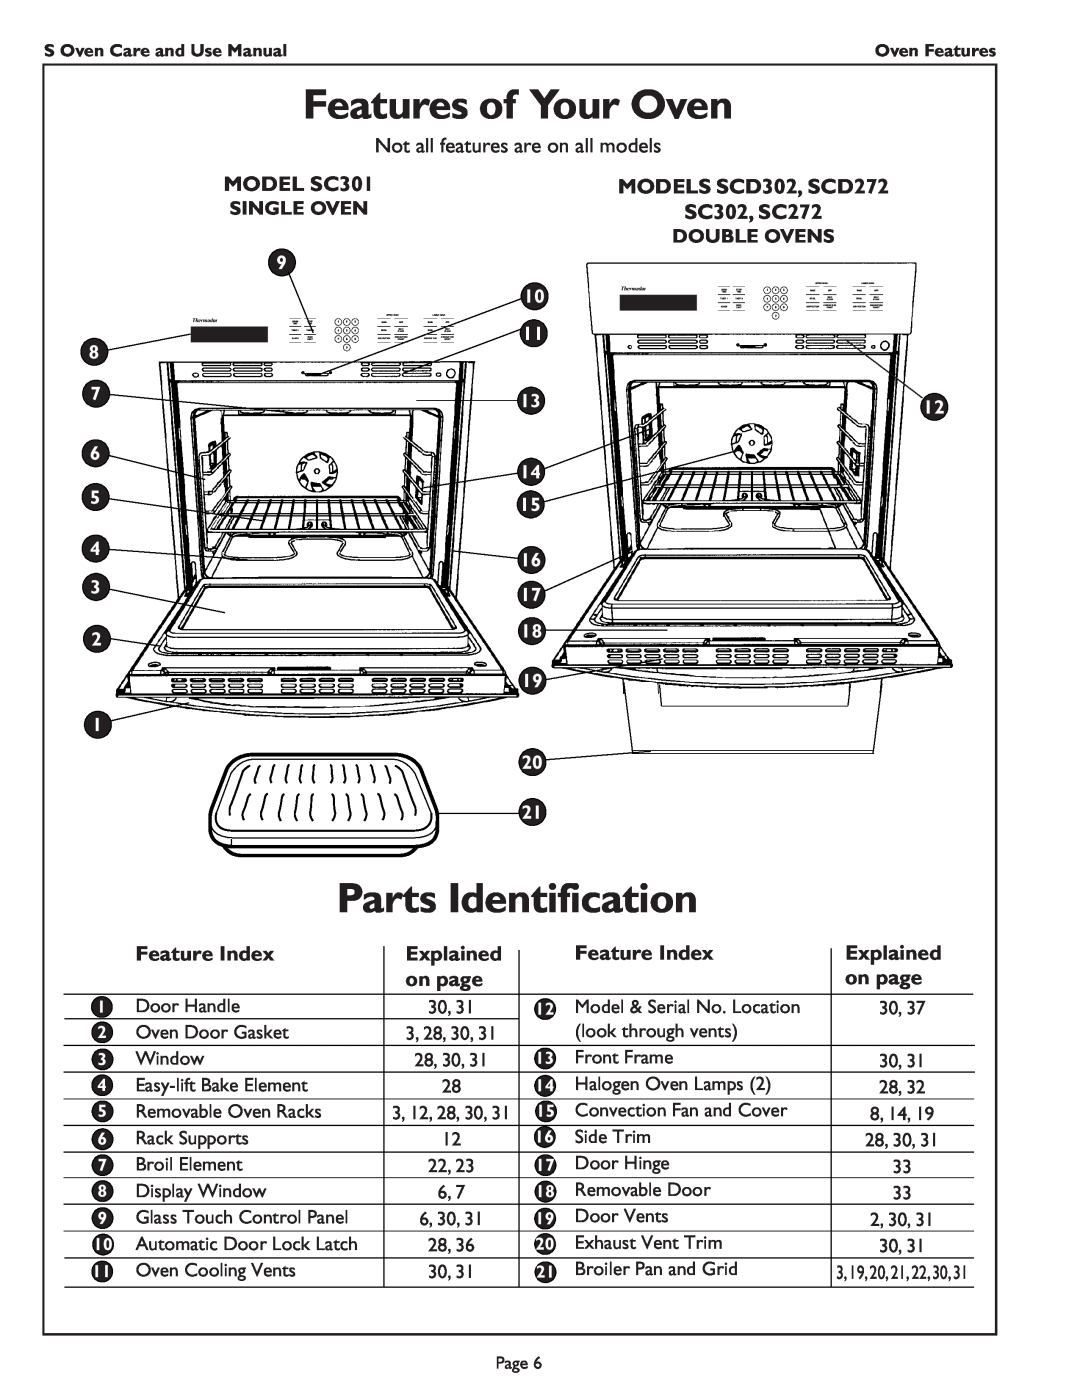 Thermador Features of Your Oven, Parts Identification, Not all features are on all models, MODEL SC301, Feature Index 